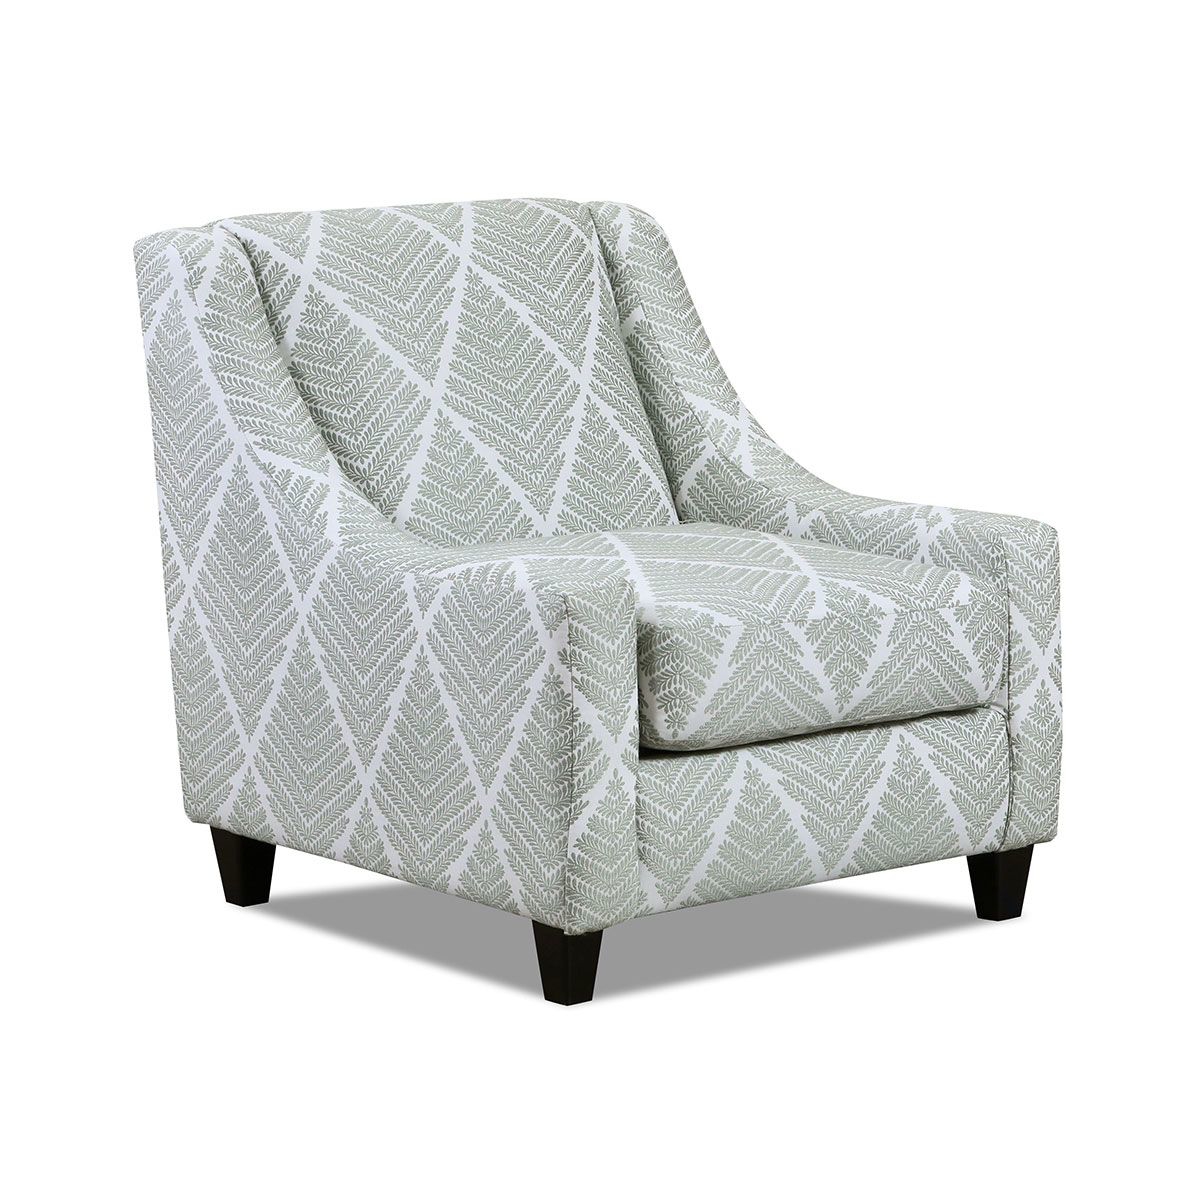 Picture of MEADOW CHAIR-LEAF PATTERN